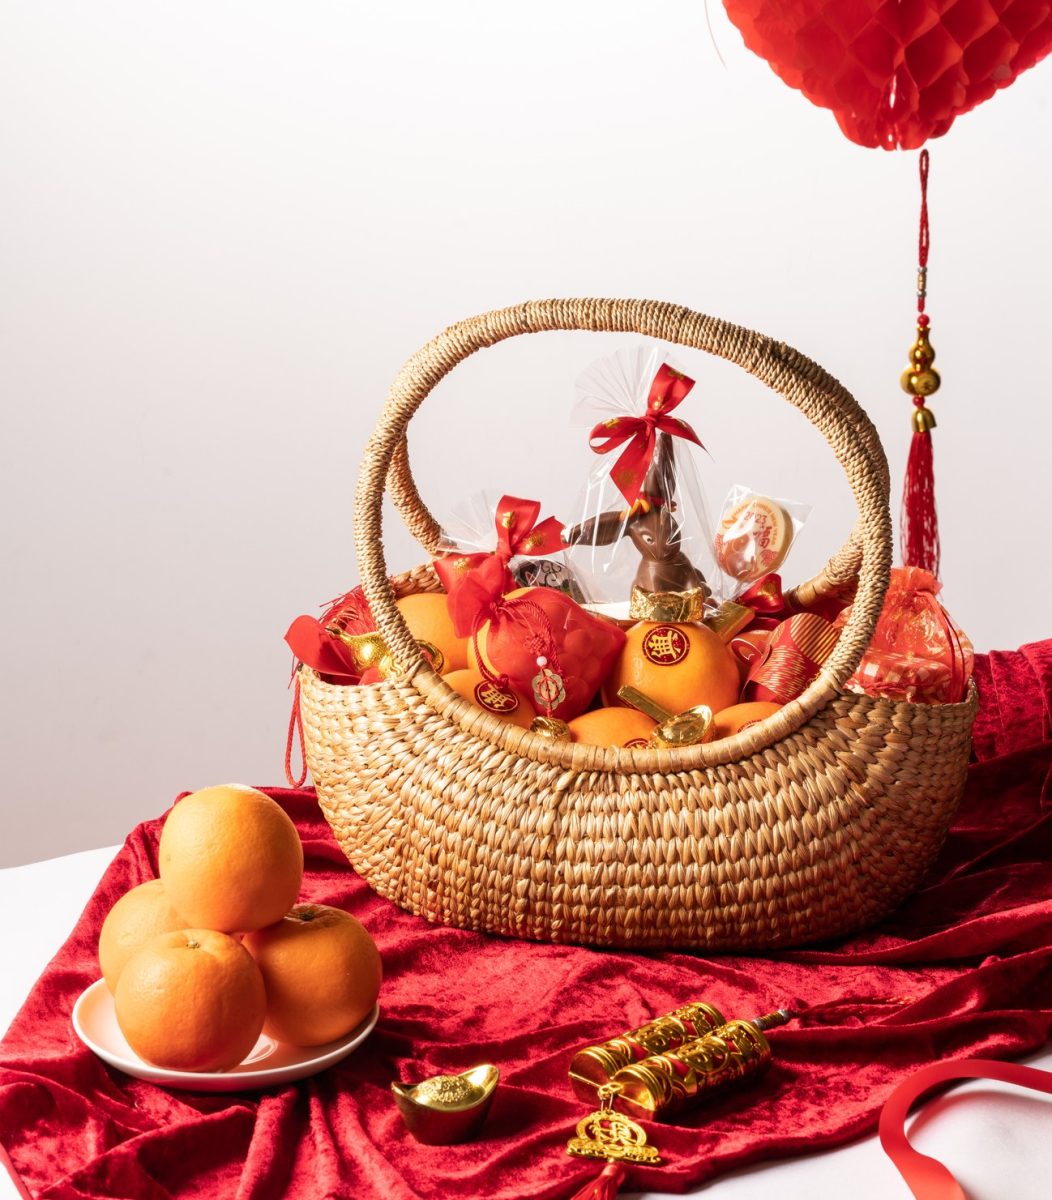 Anantara Siam Bangkok Hotel Keeps Things Sweet this Lunar New Year with Festive Hampers and Limited-Edition Pastry